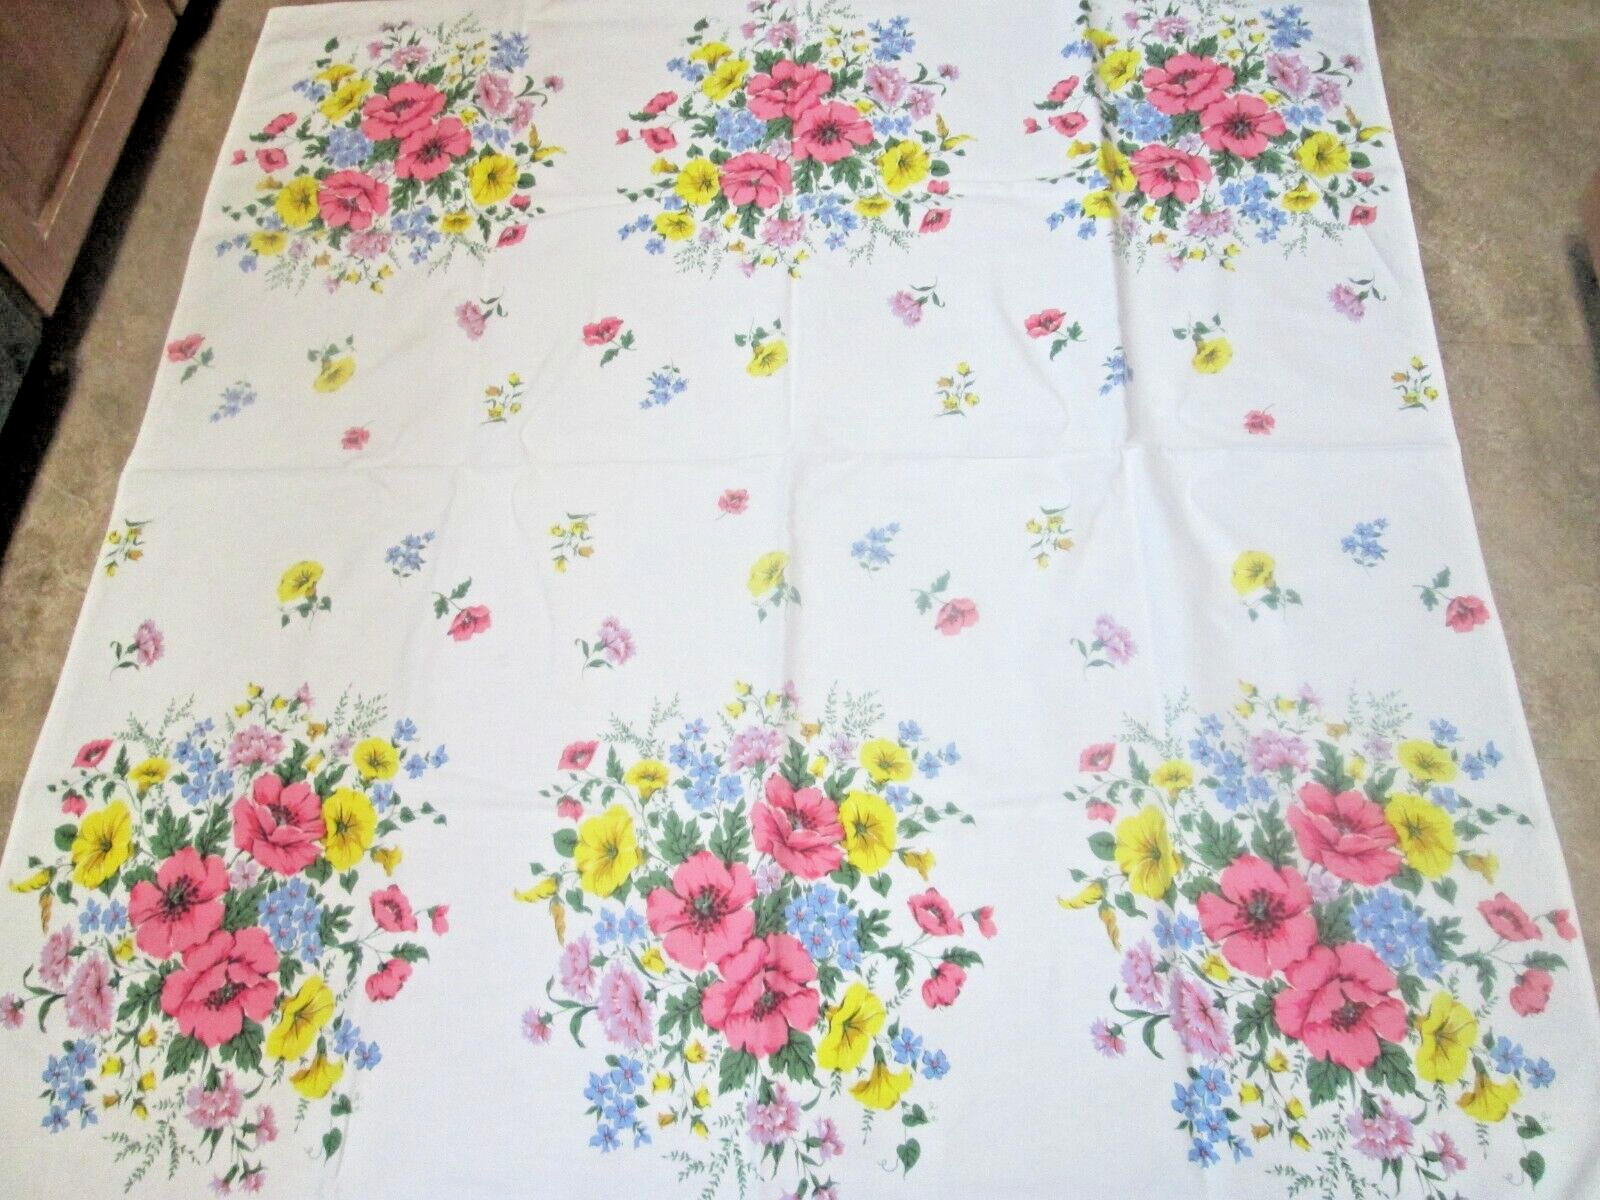 Vtg Summer Flowers Tablecloth Pinks/Yellow/ Blue/ Lavender/Green 48x50 A++Cond